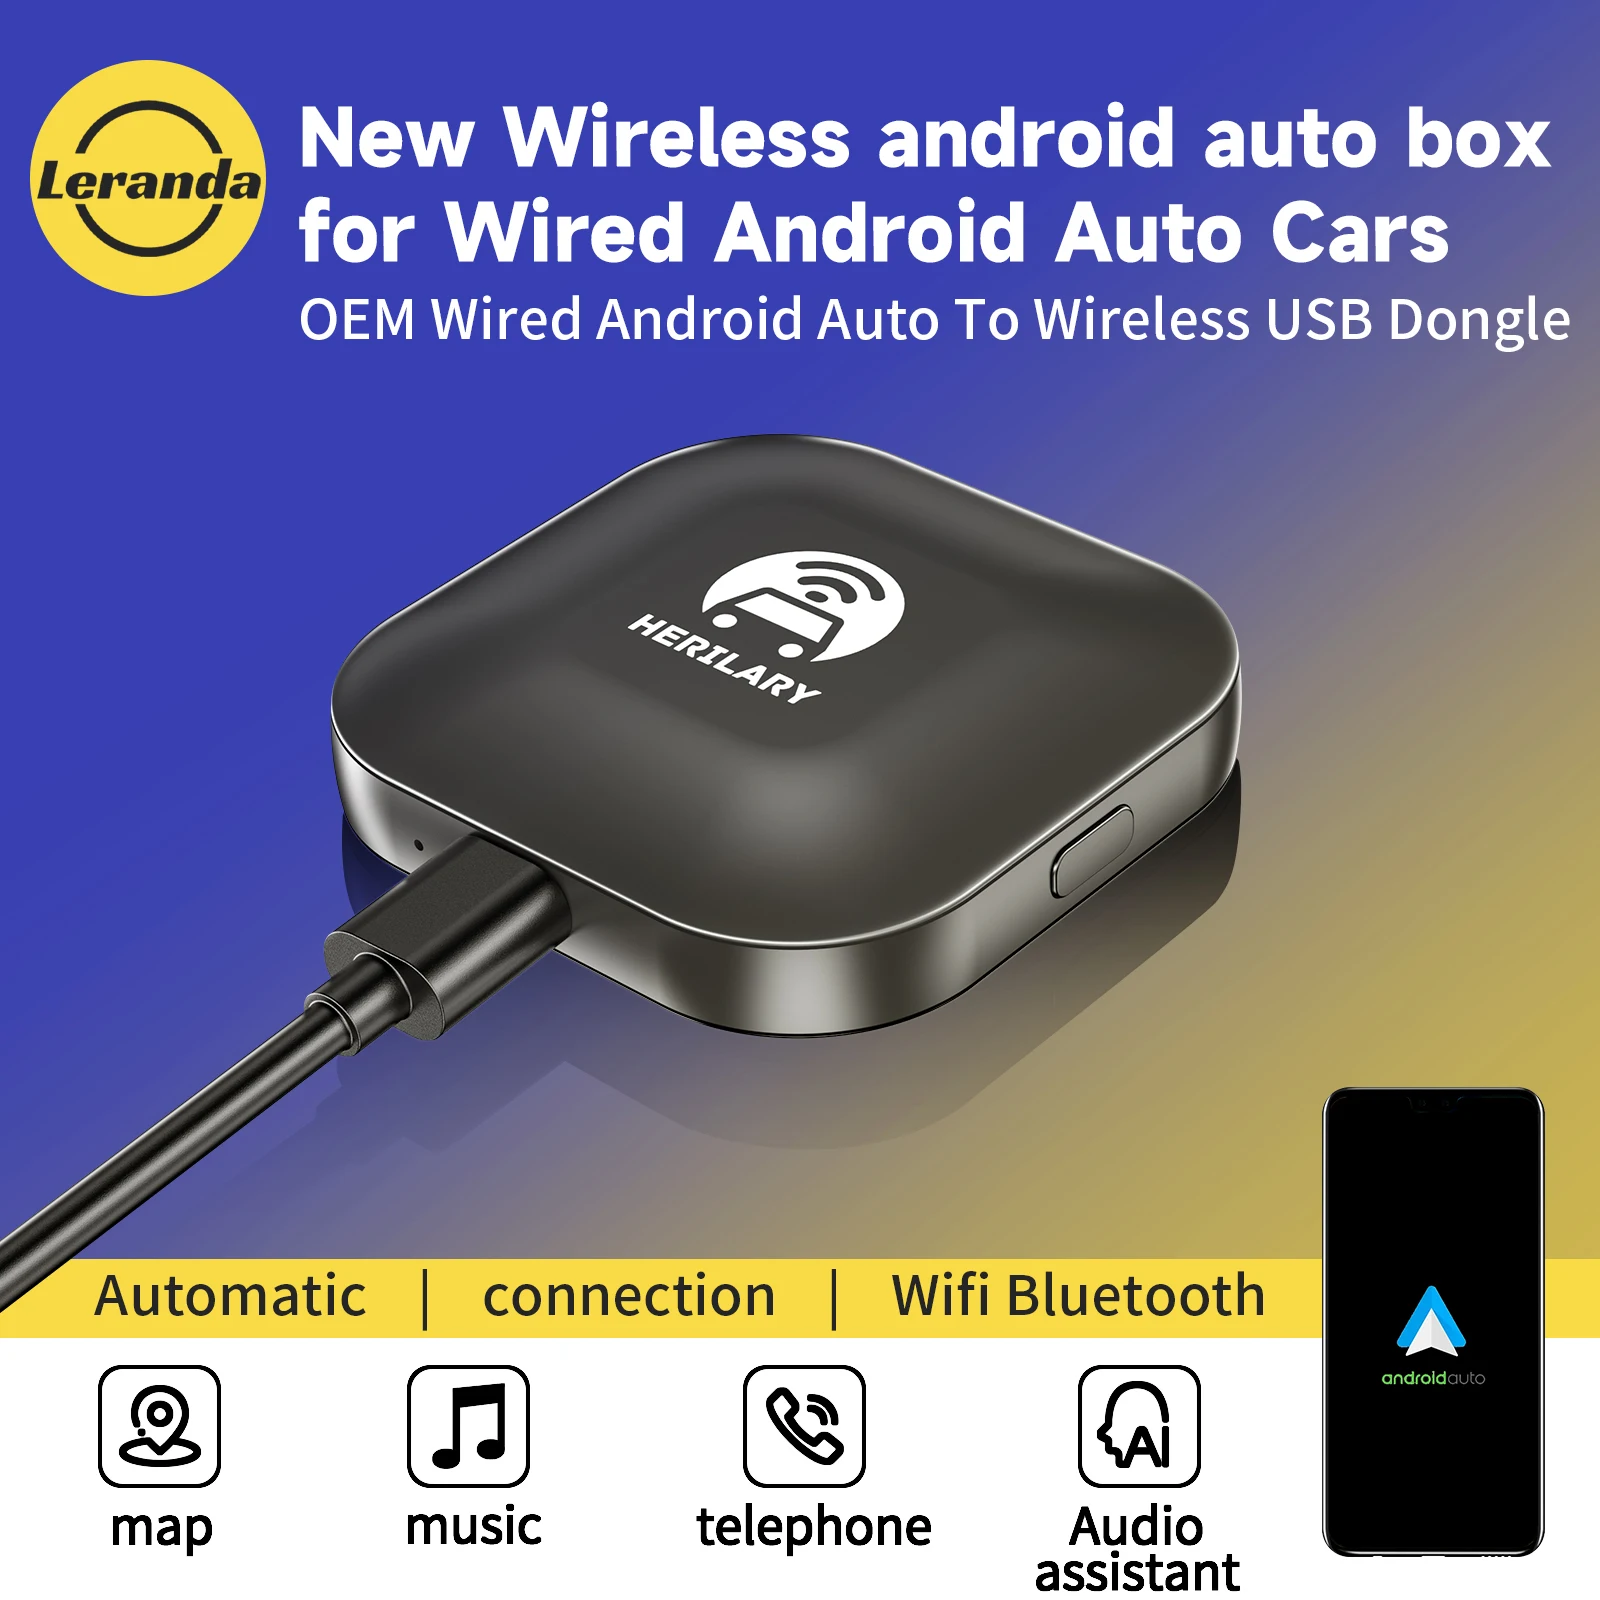 AAWireless - Bring wireless Android Auto connection to your car